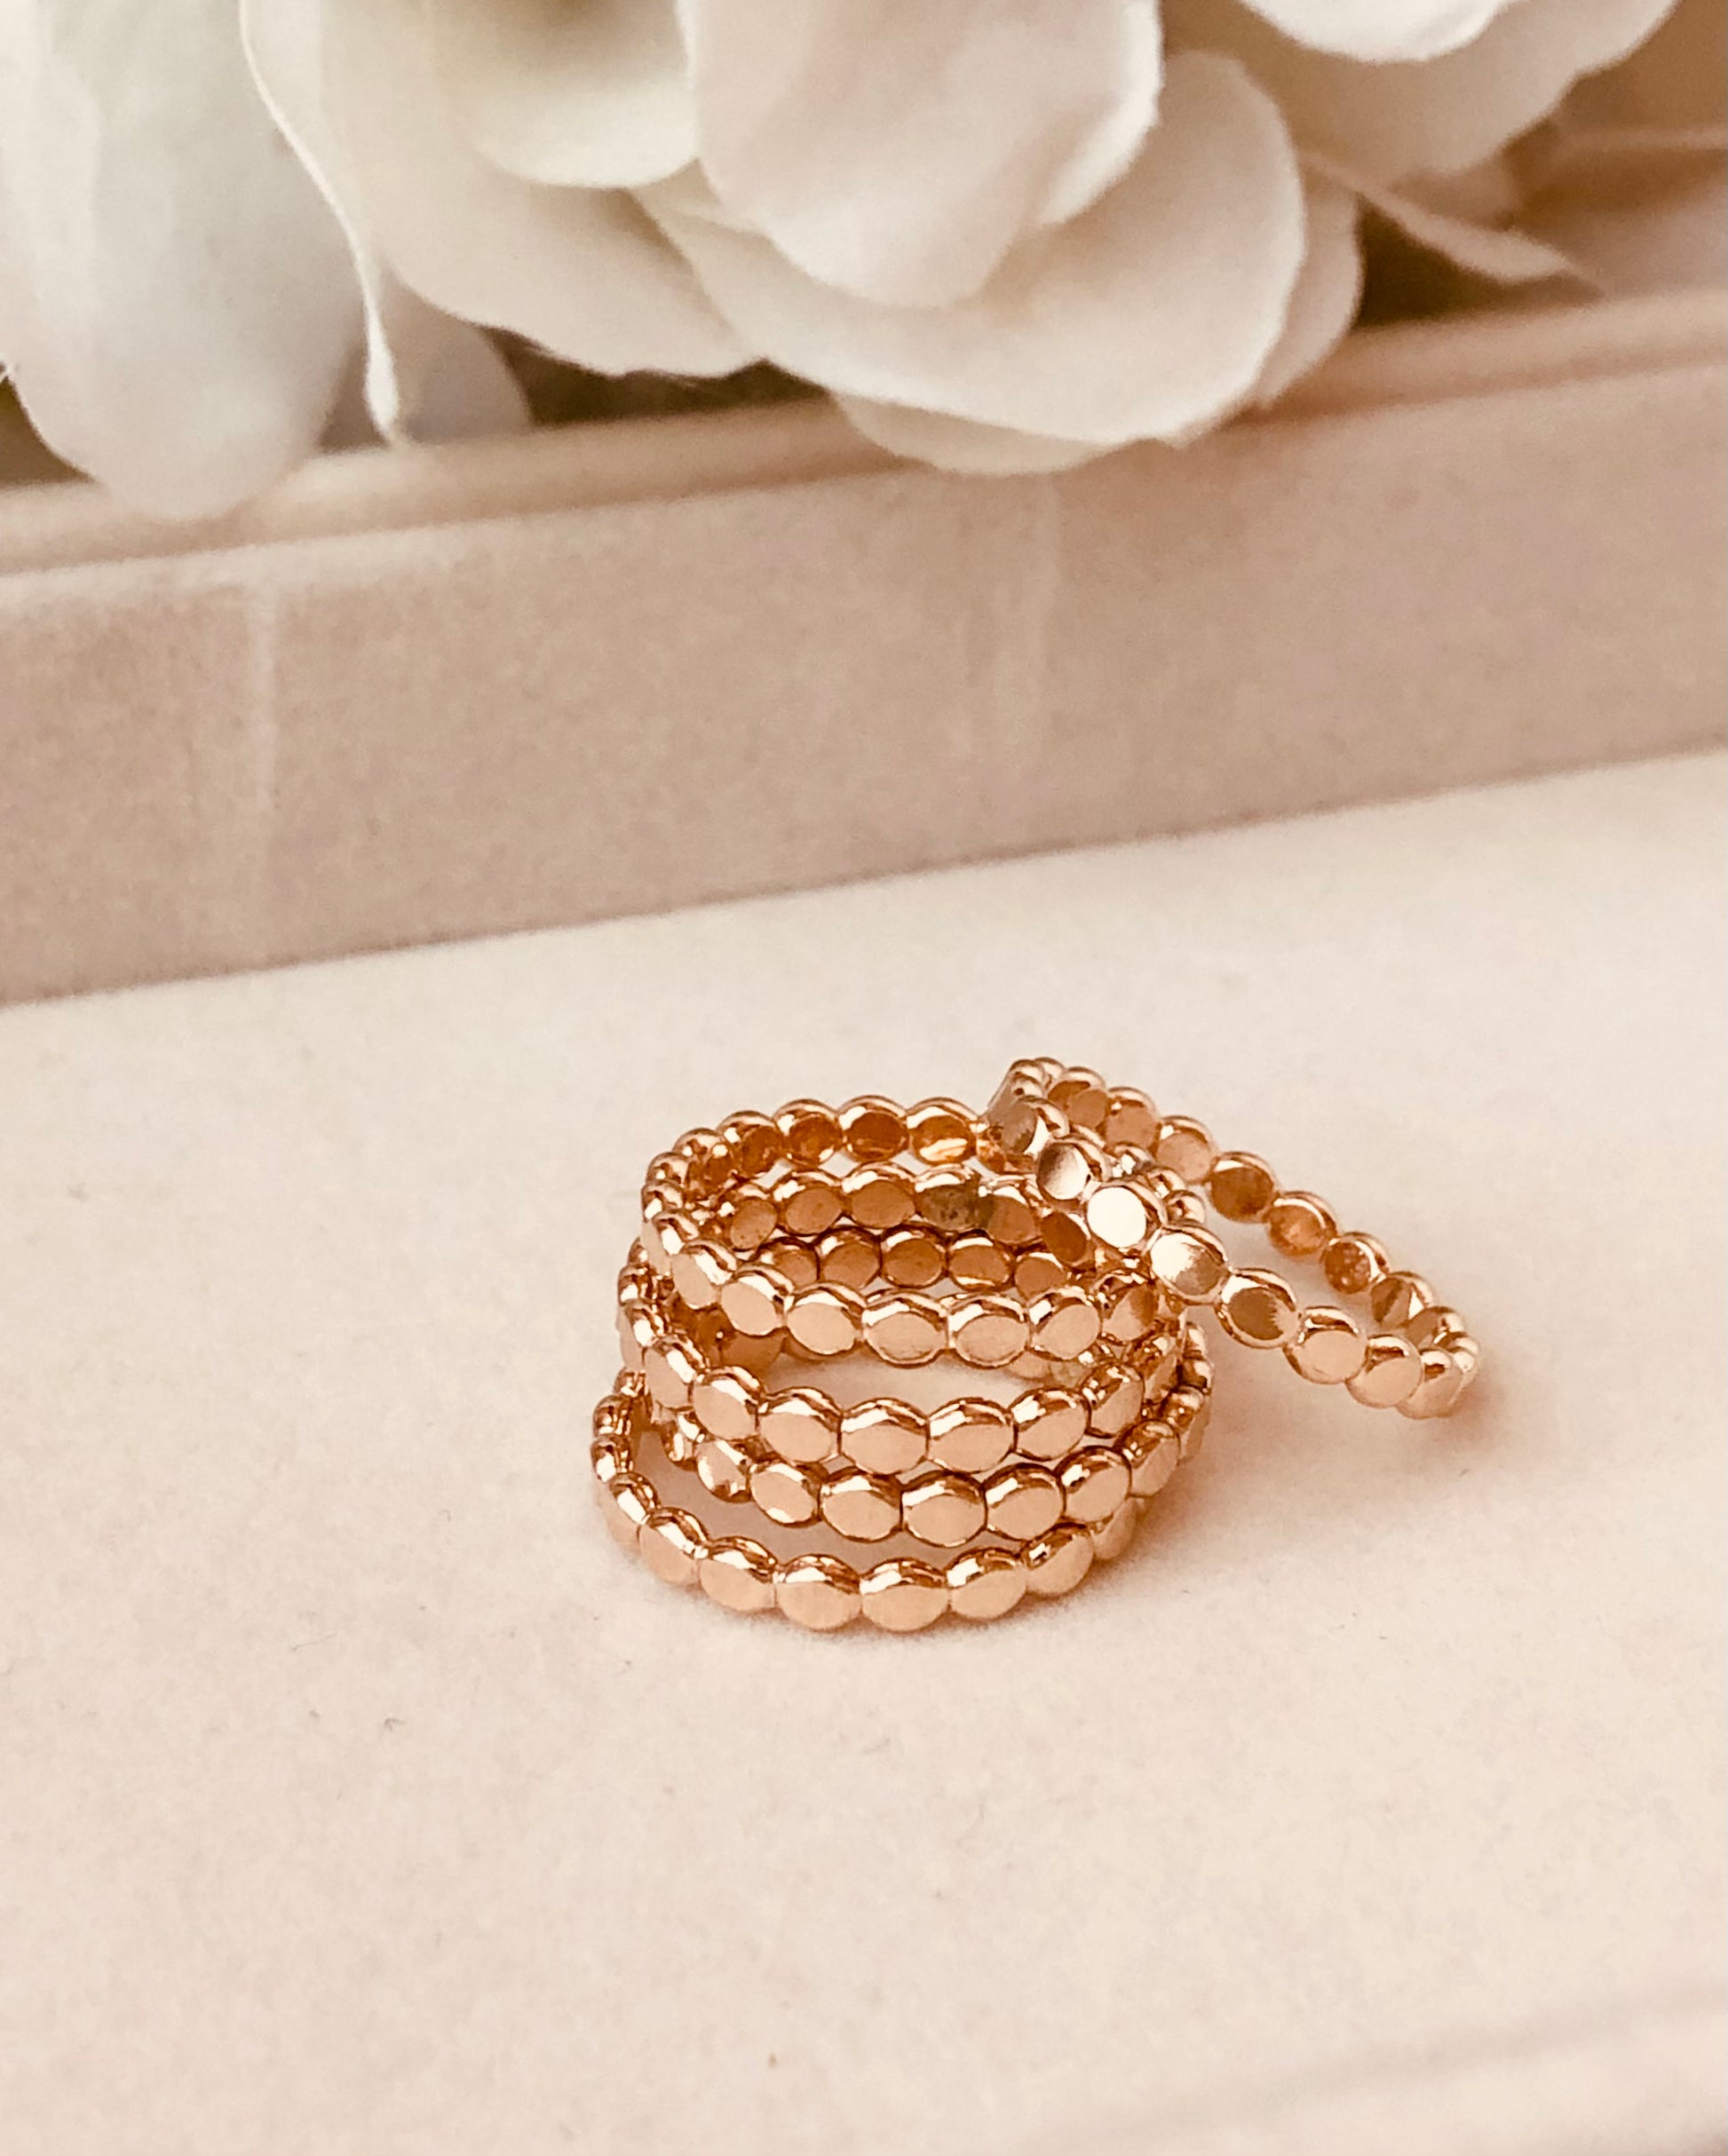 Gold Hammered Beaded Ring, Gold Dot Stacking Ring, Gold Dot Ring, Hammered Beaded Band, Dainty Ring, Stacking Ring, Gift For Her, Gift Ideas Price: